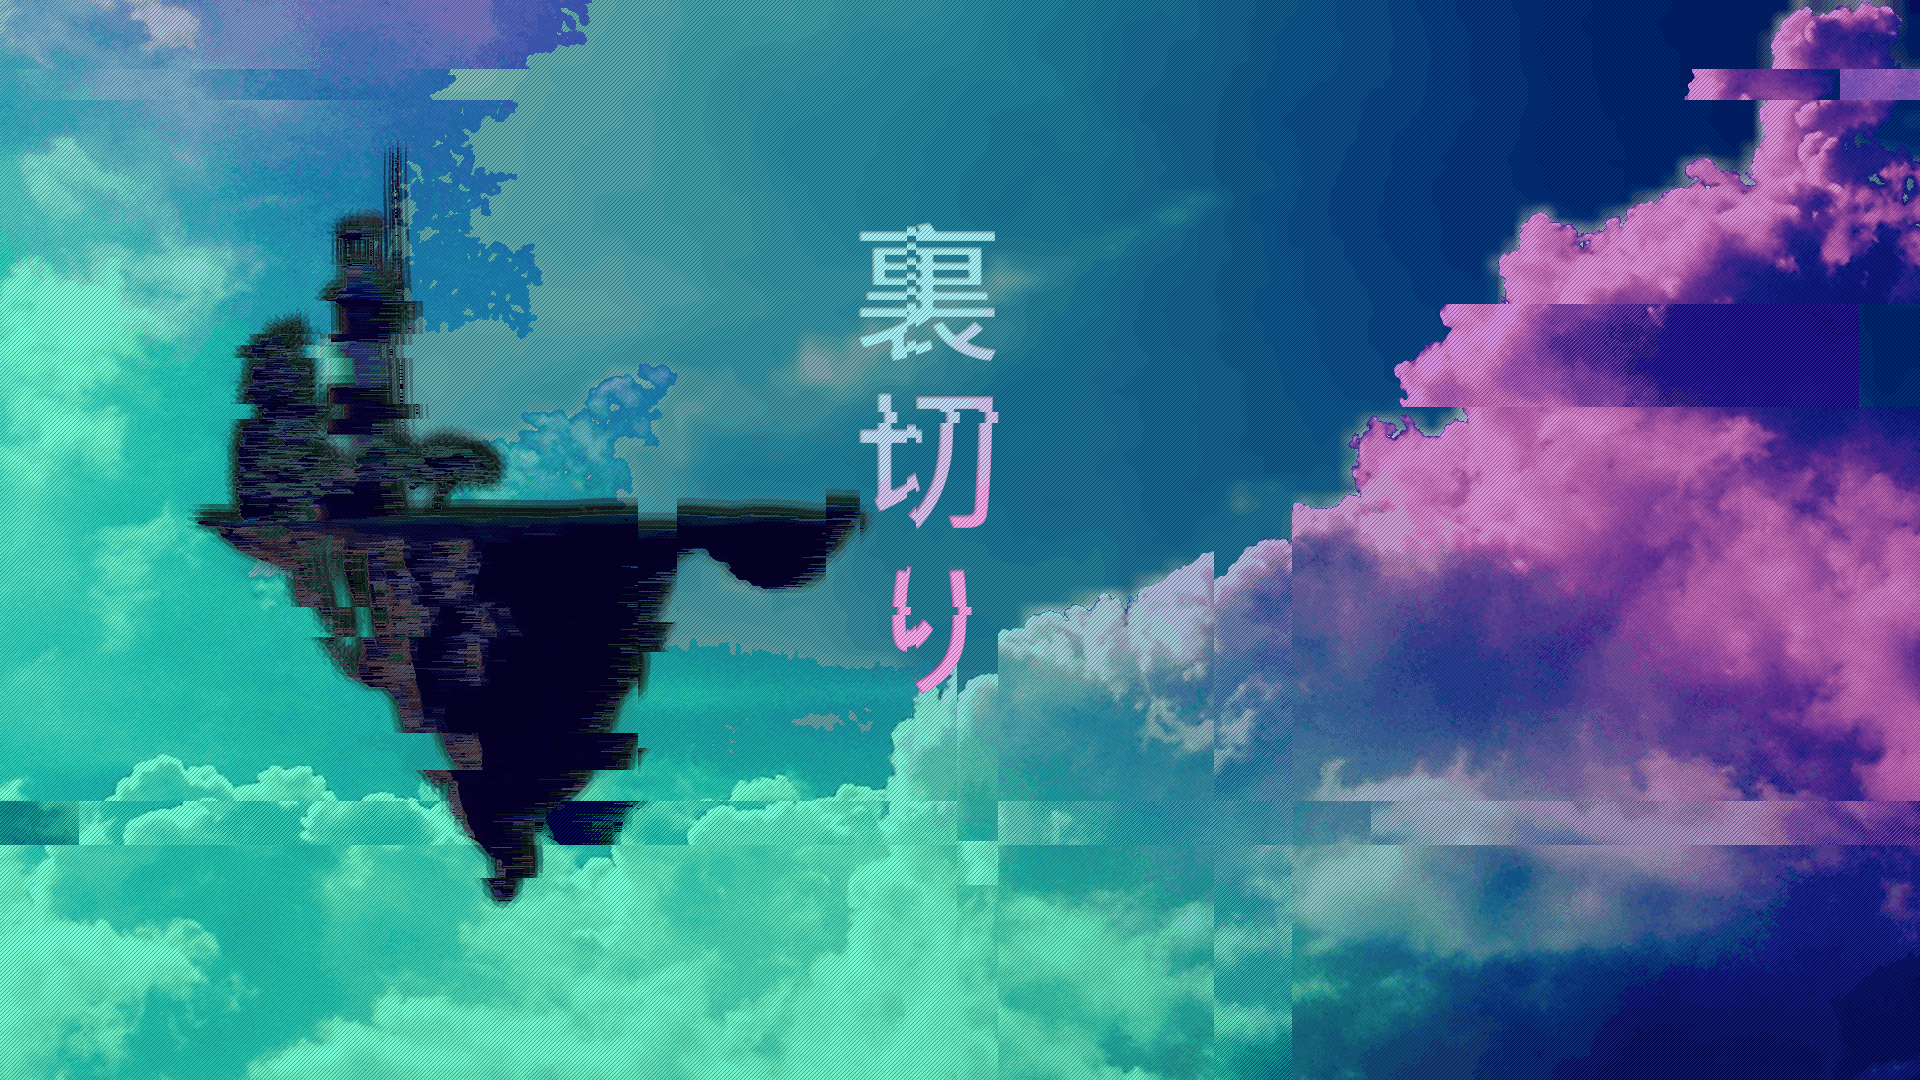 Hd laptop anime glitch wallpapers